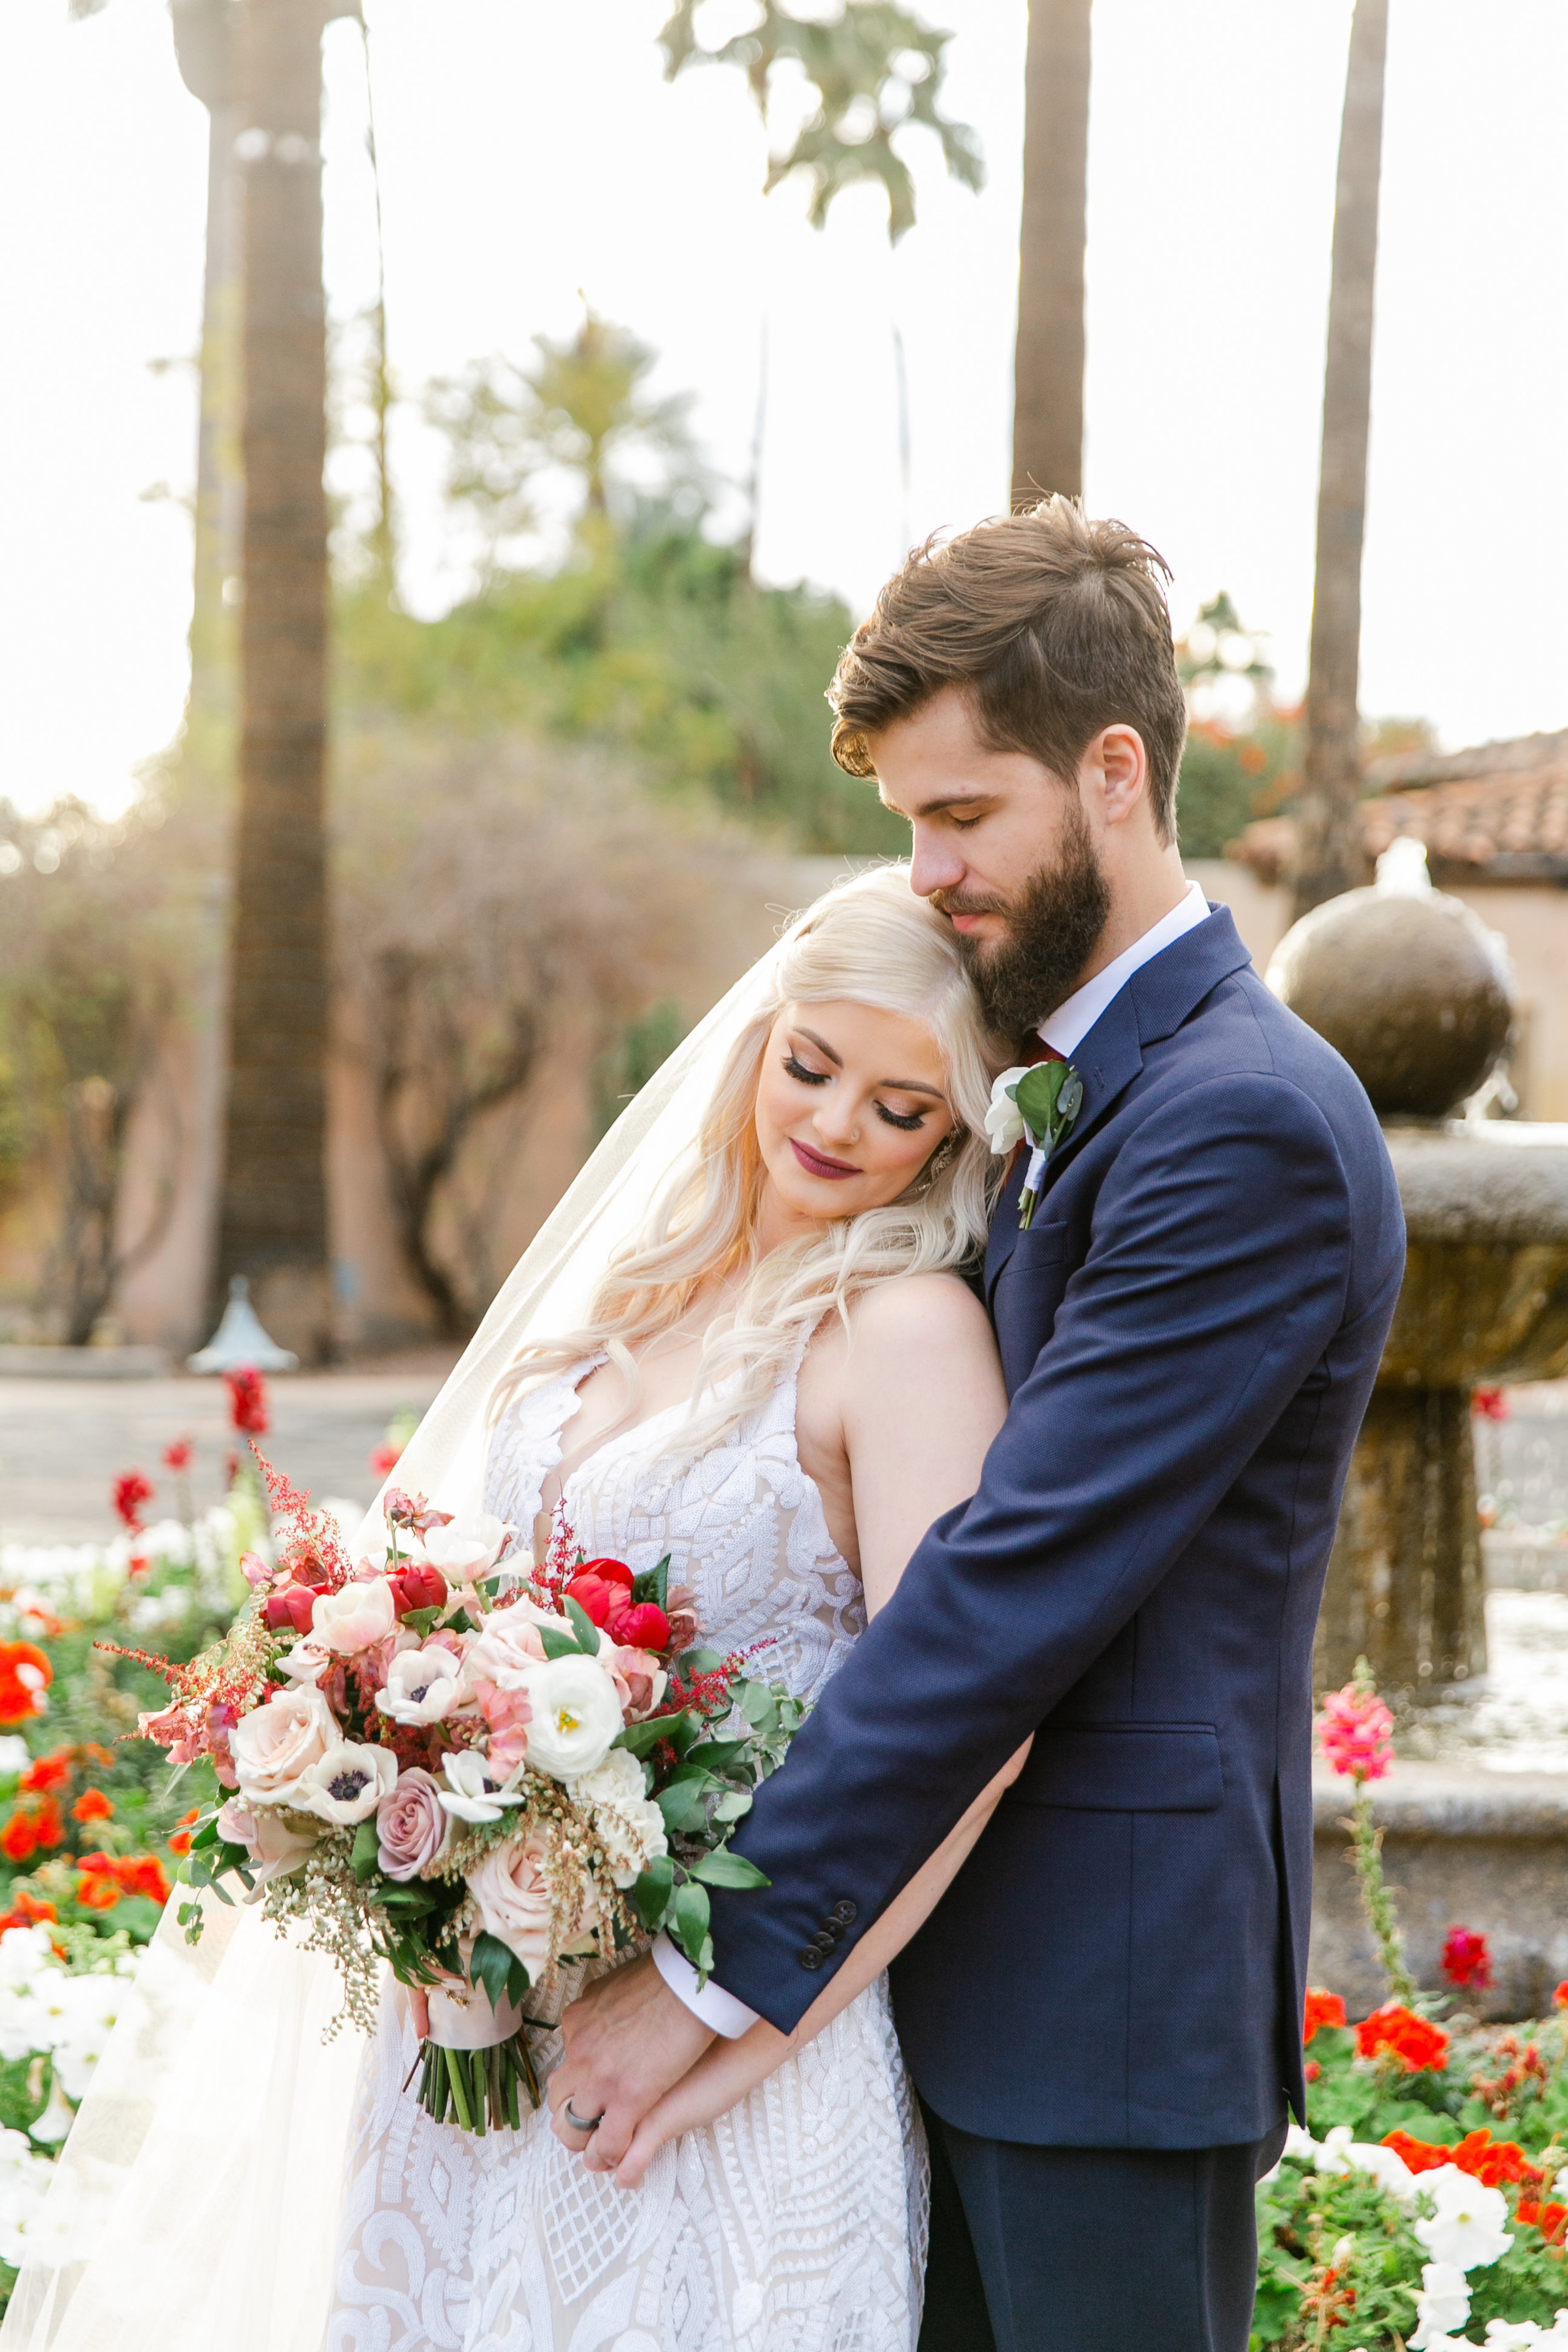 Karlie Colleen Photography - The Royal Palms Wedding - Some Like It Classic - Alex & Sam-543